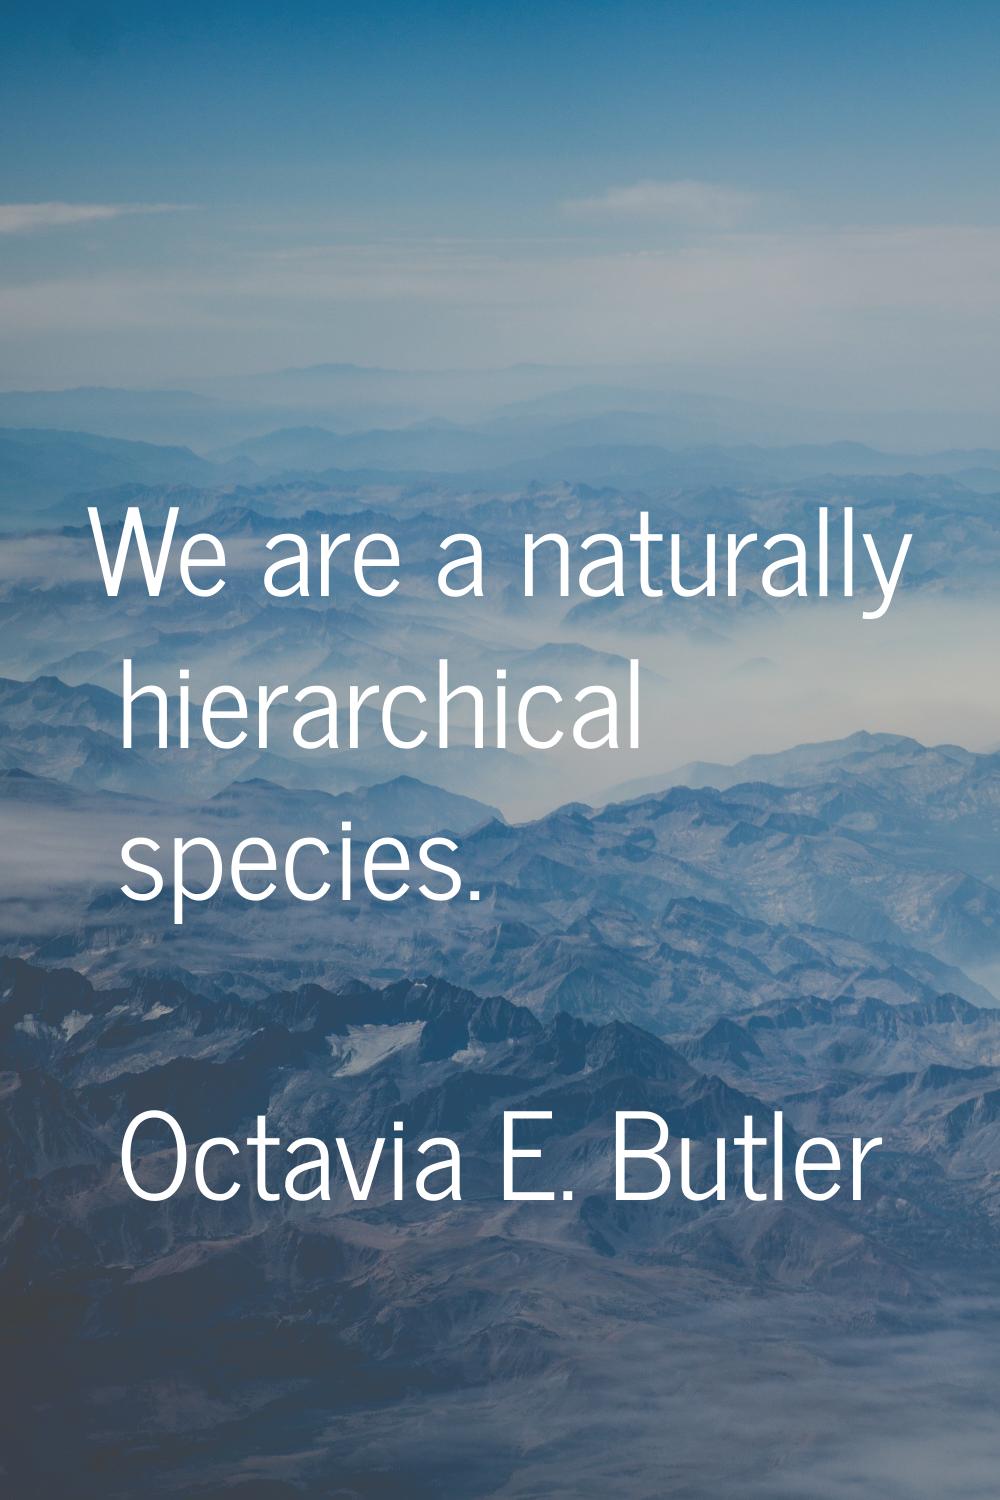 We are a naturally hierarchical species.